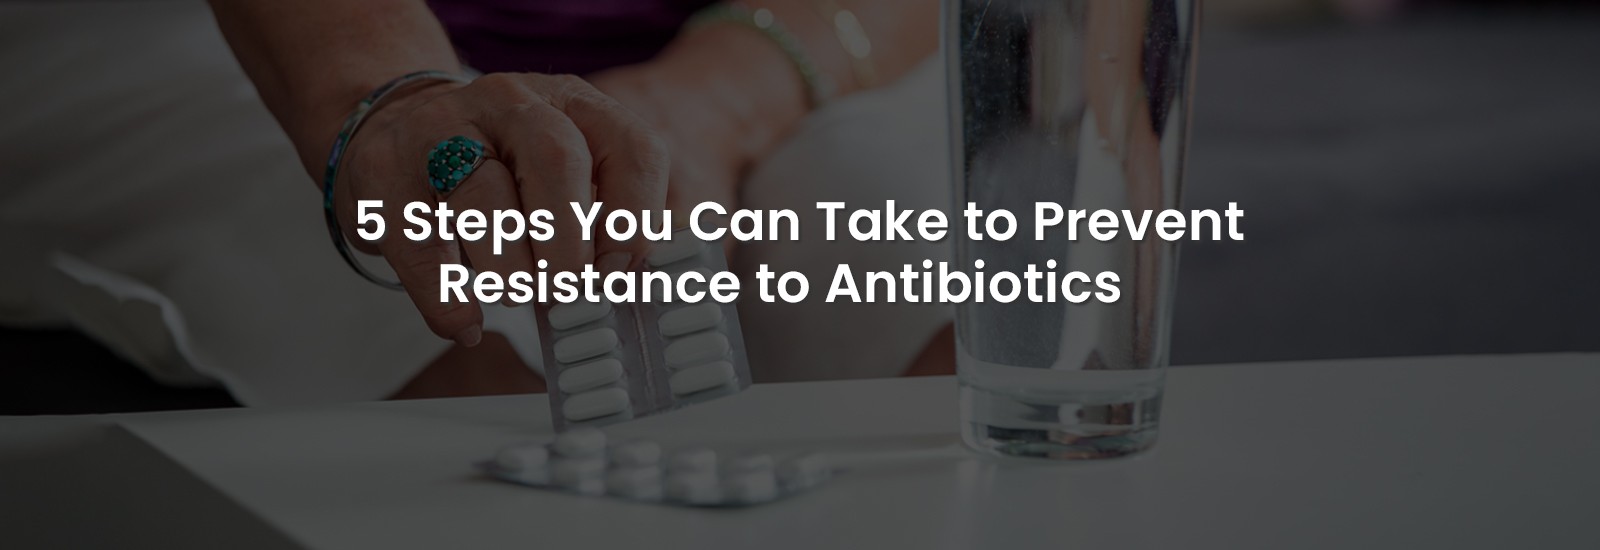 5 Steps You Can Take to Prevent Resistance to Antibiotics | Banner Image